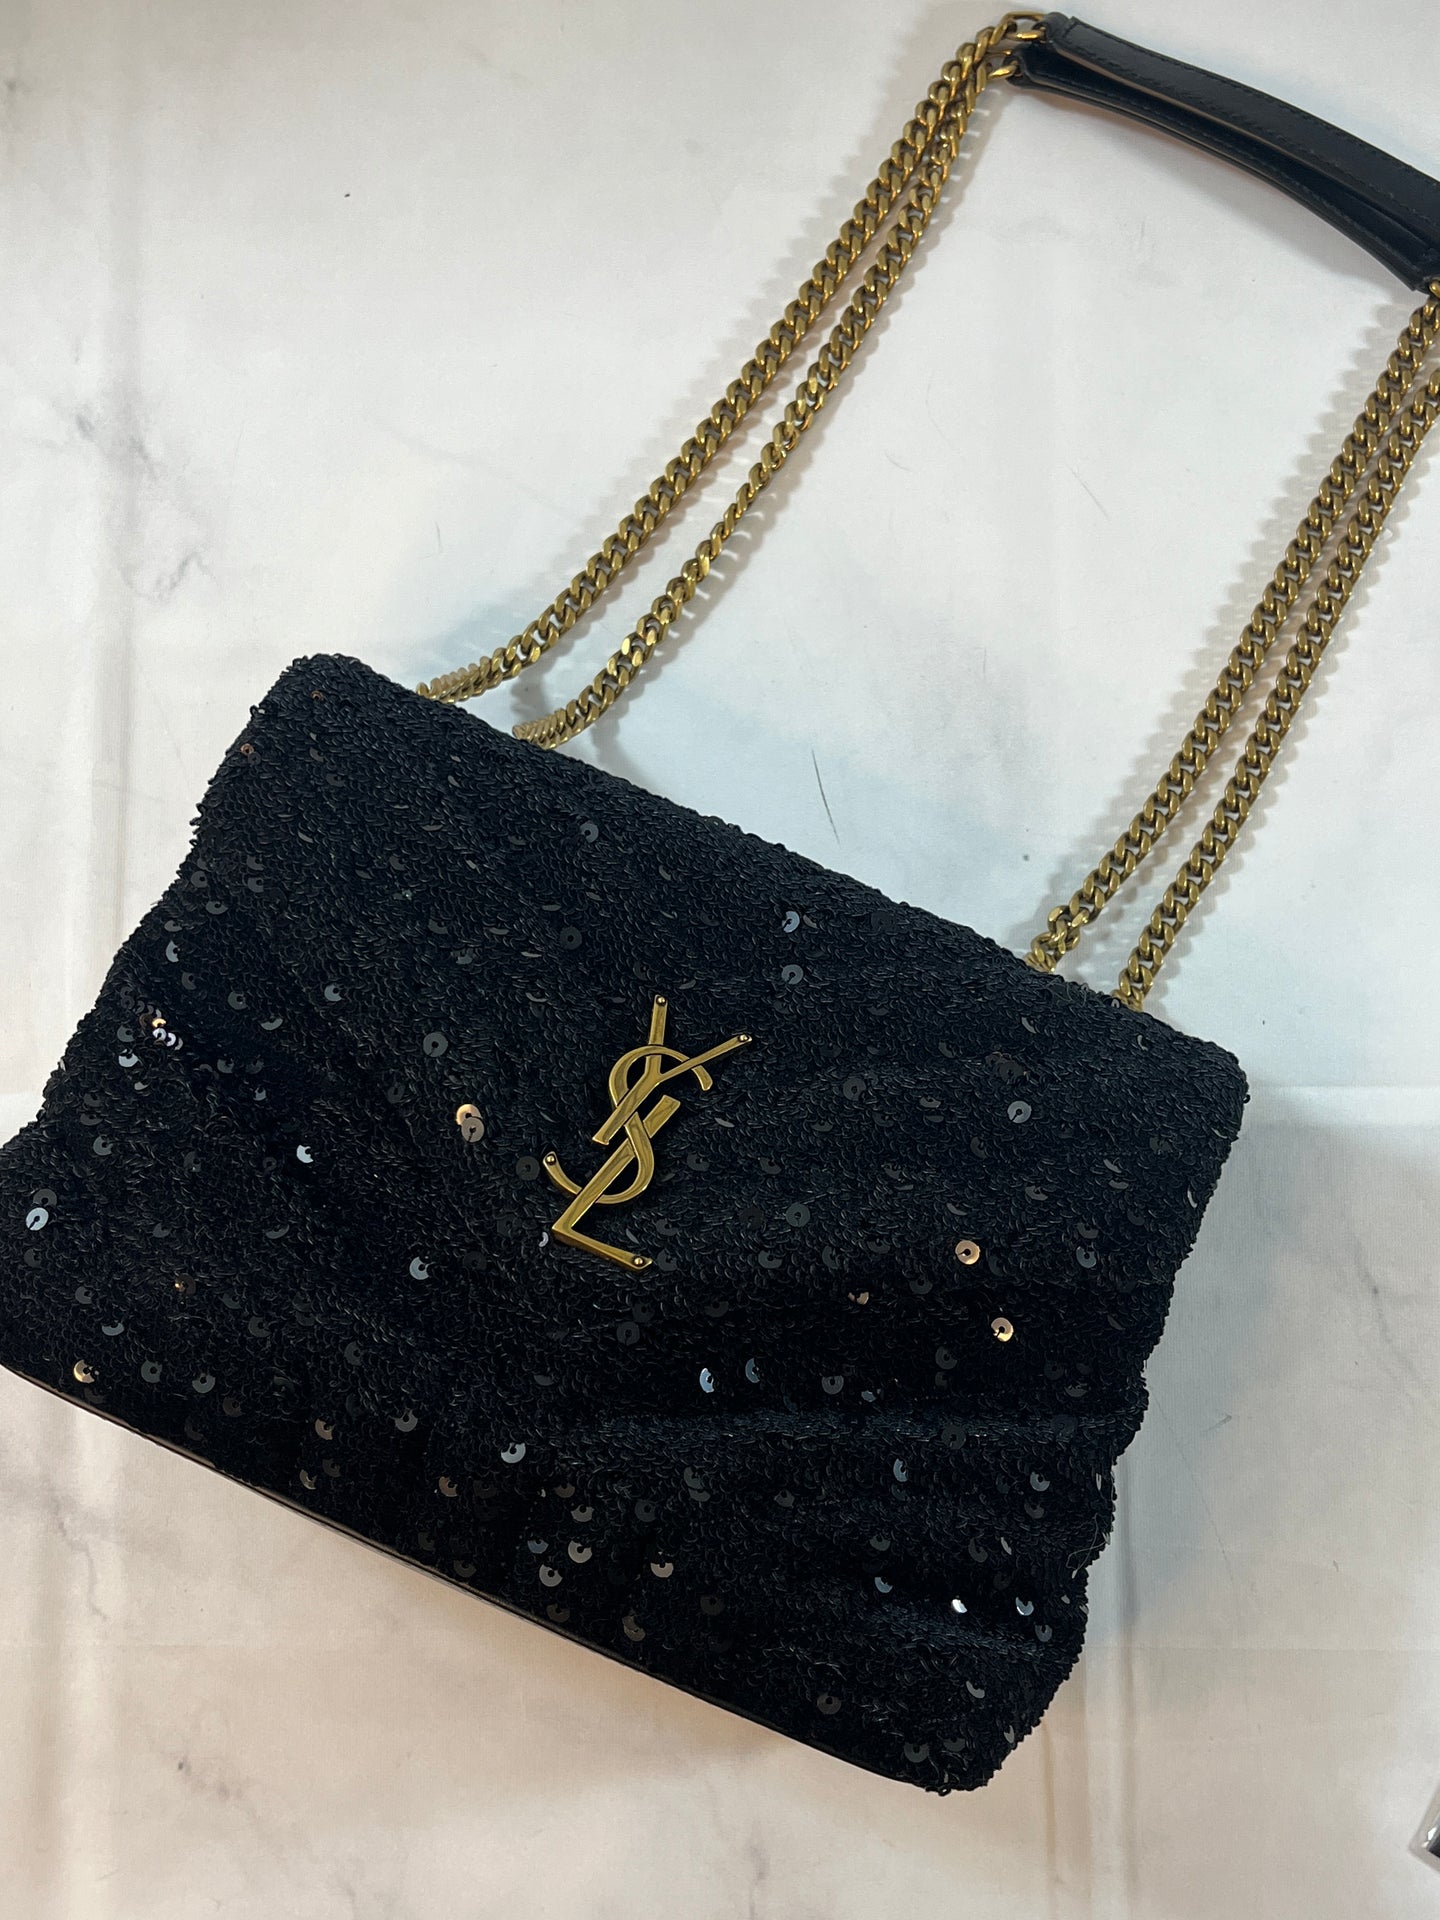 Bag Loulou small black monogrammed gold